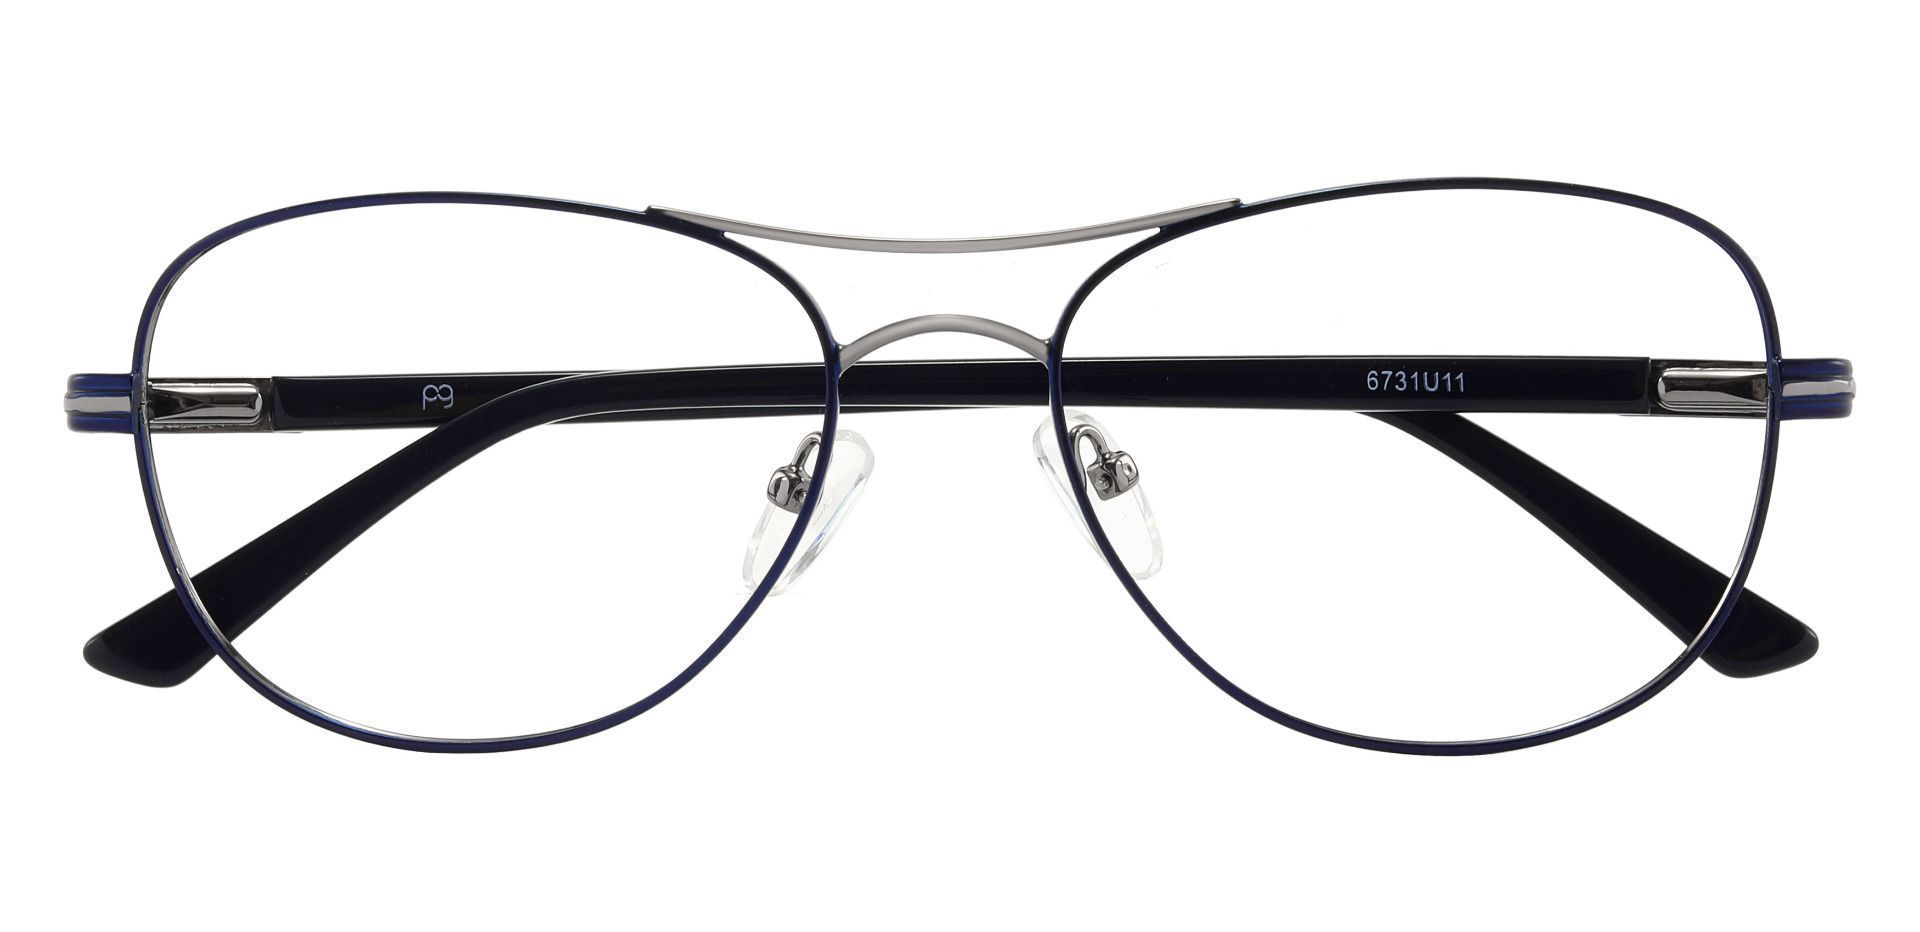 Reeves Aviator Lined Bifocal Glasses - Blue